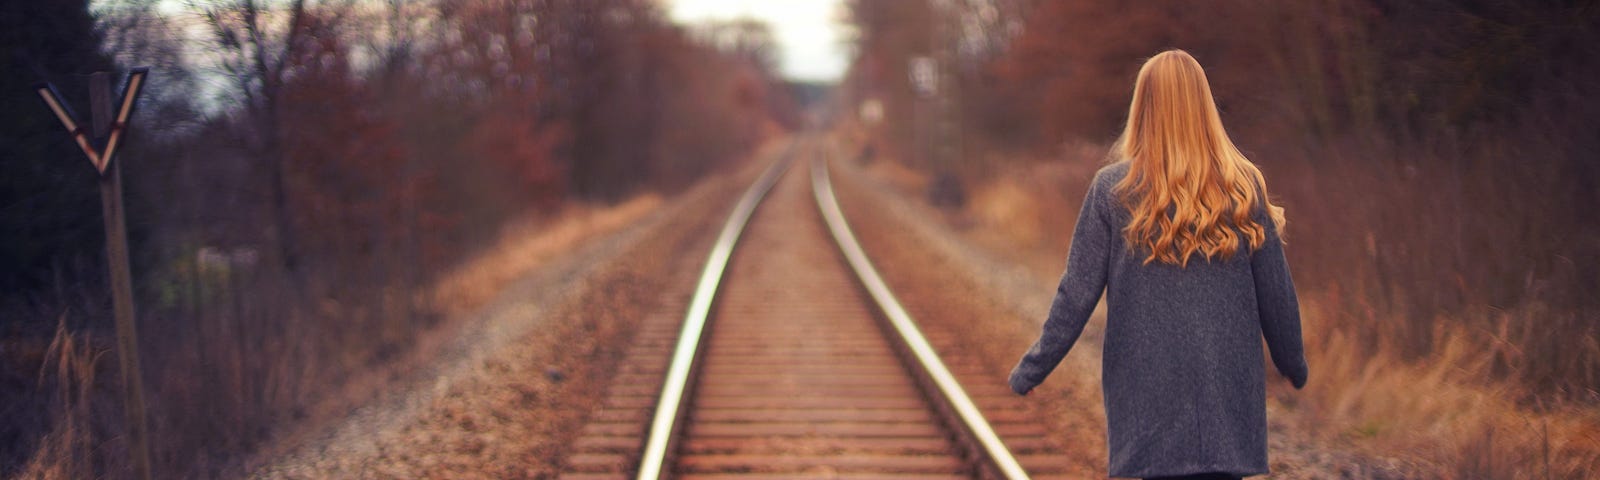 A woman with long red and a grey coat, balances on railroad tracks. Photo by Johannes Plenio on Unsplash